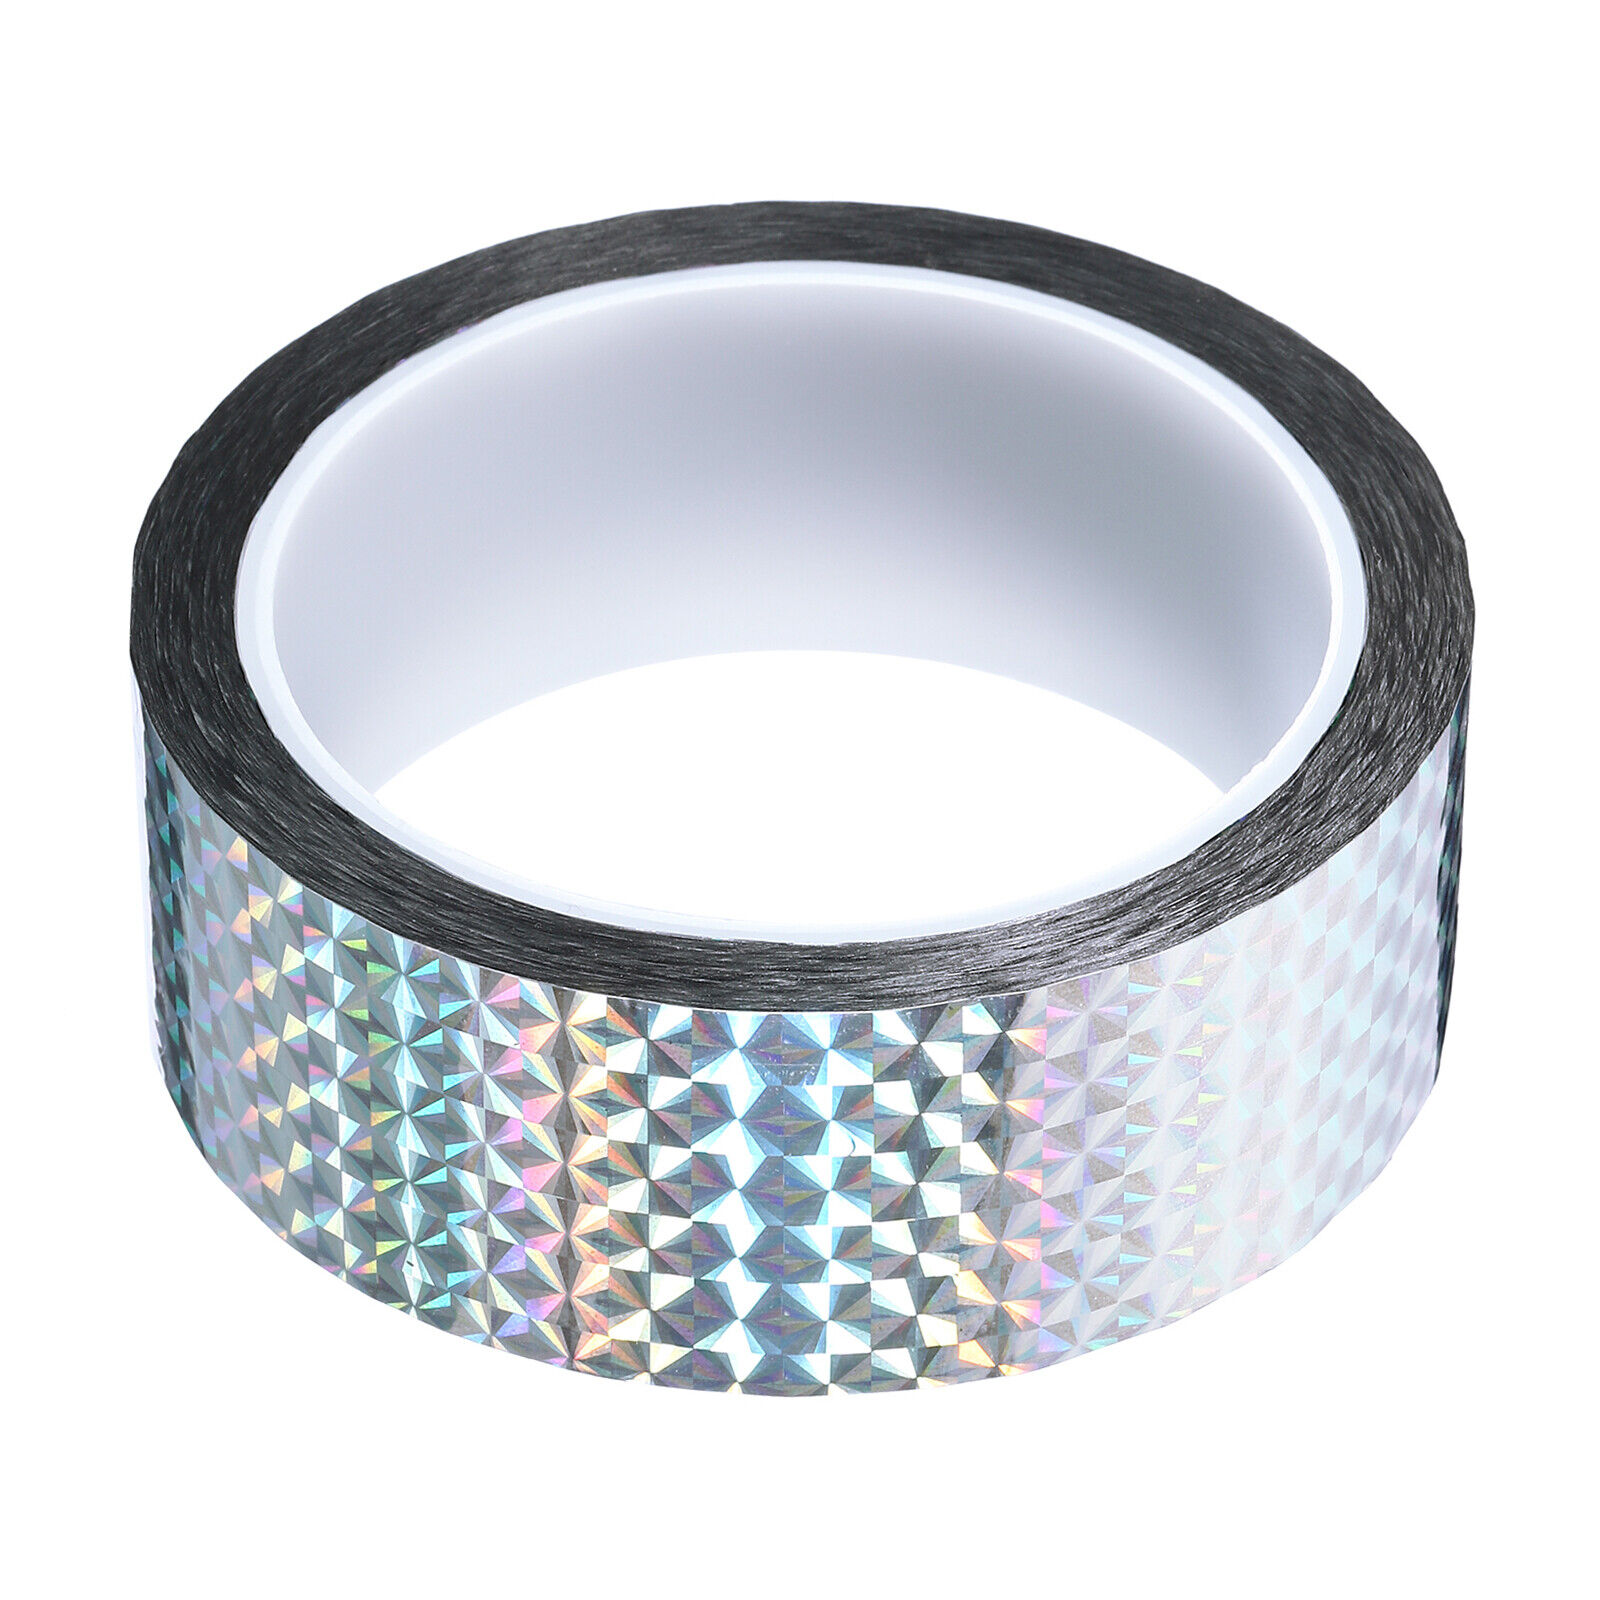 Prism Tape Holographic Reflective Self Adhesive 35mm x 50m for DIY Art Craft